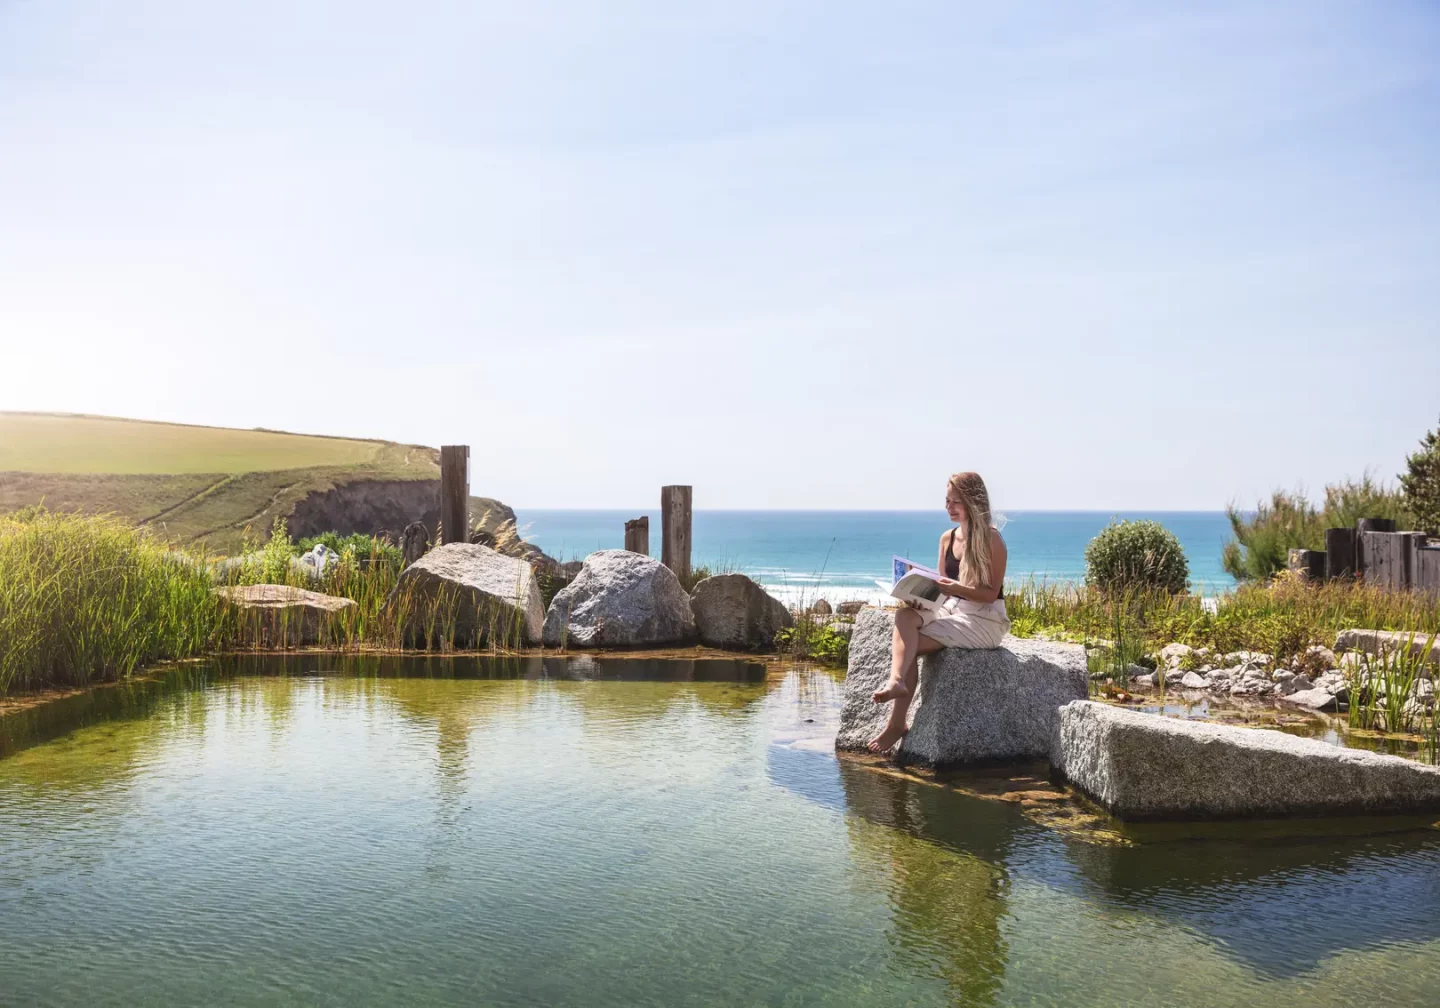 The Coolest Eco Hotels In The World | 14 of the Best Green Places To Stay that are effortlessly sustainable in Mexico, Bali, Britain, India and more